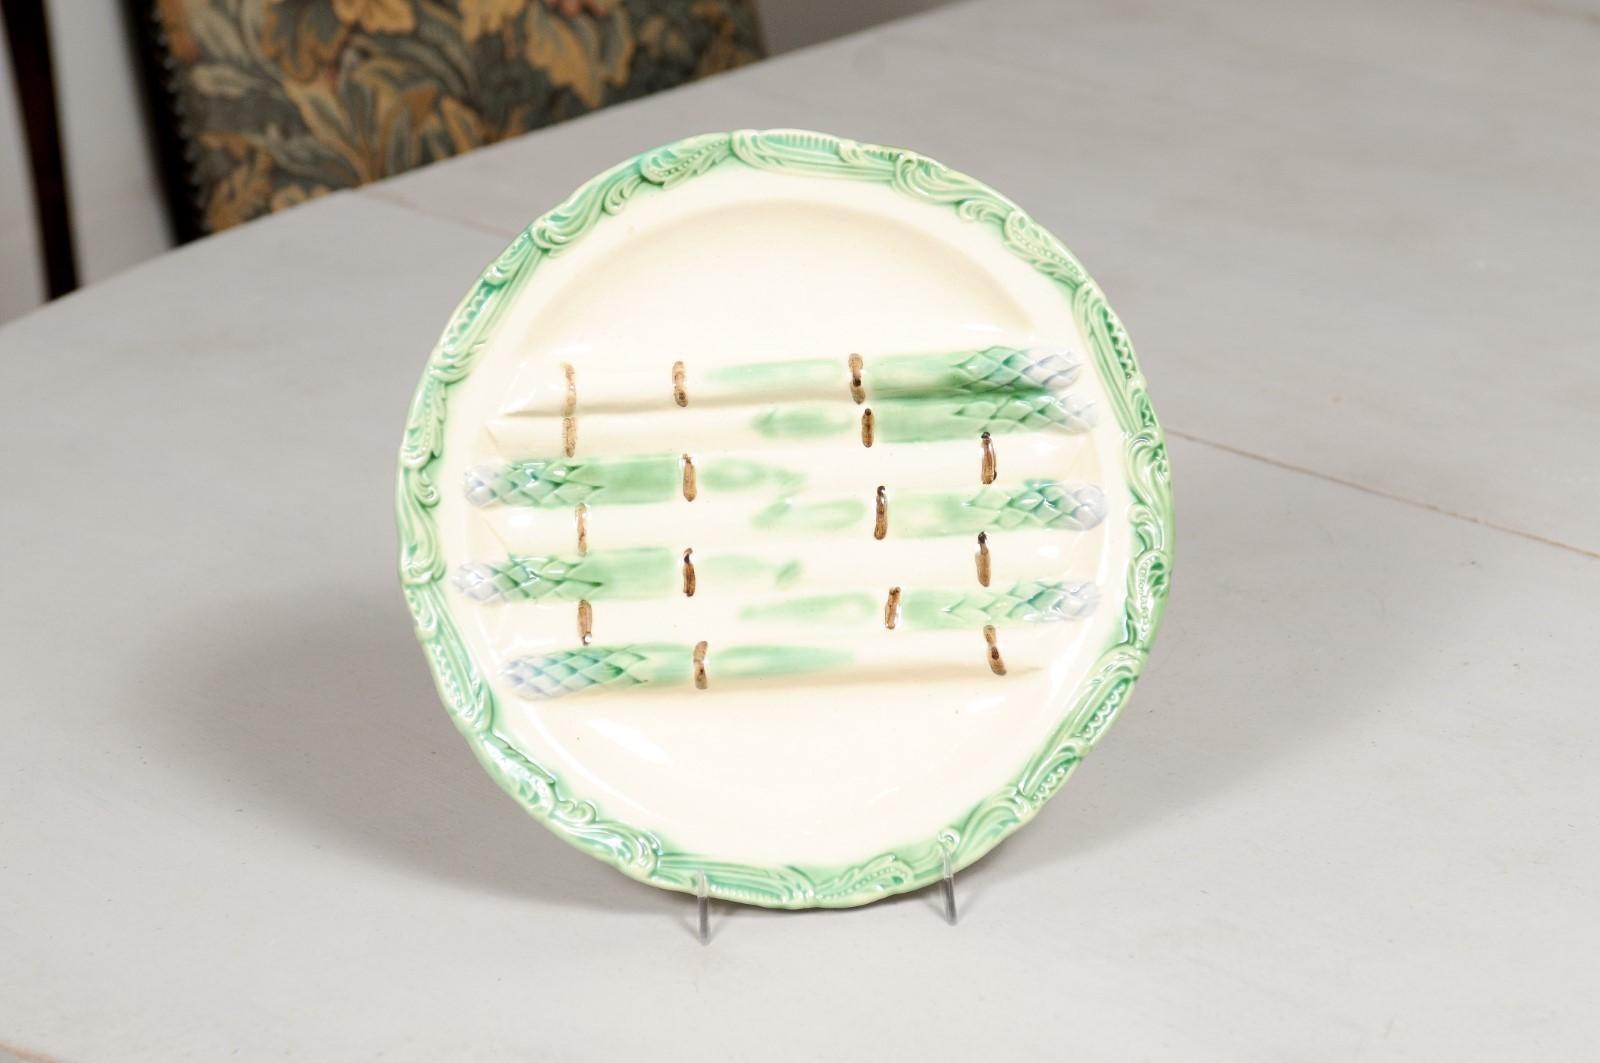 A French majolica asparagus plate from the 19th century, with green, cream, purple and brown accents. Created in France during the 19th century, this majolica plate features seven asparagus with green bodies and purple heads, resting on a cream